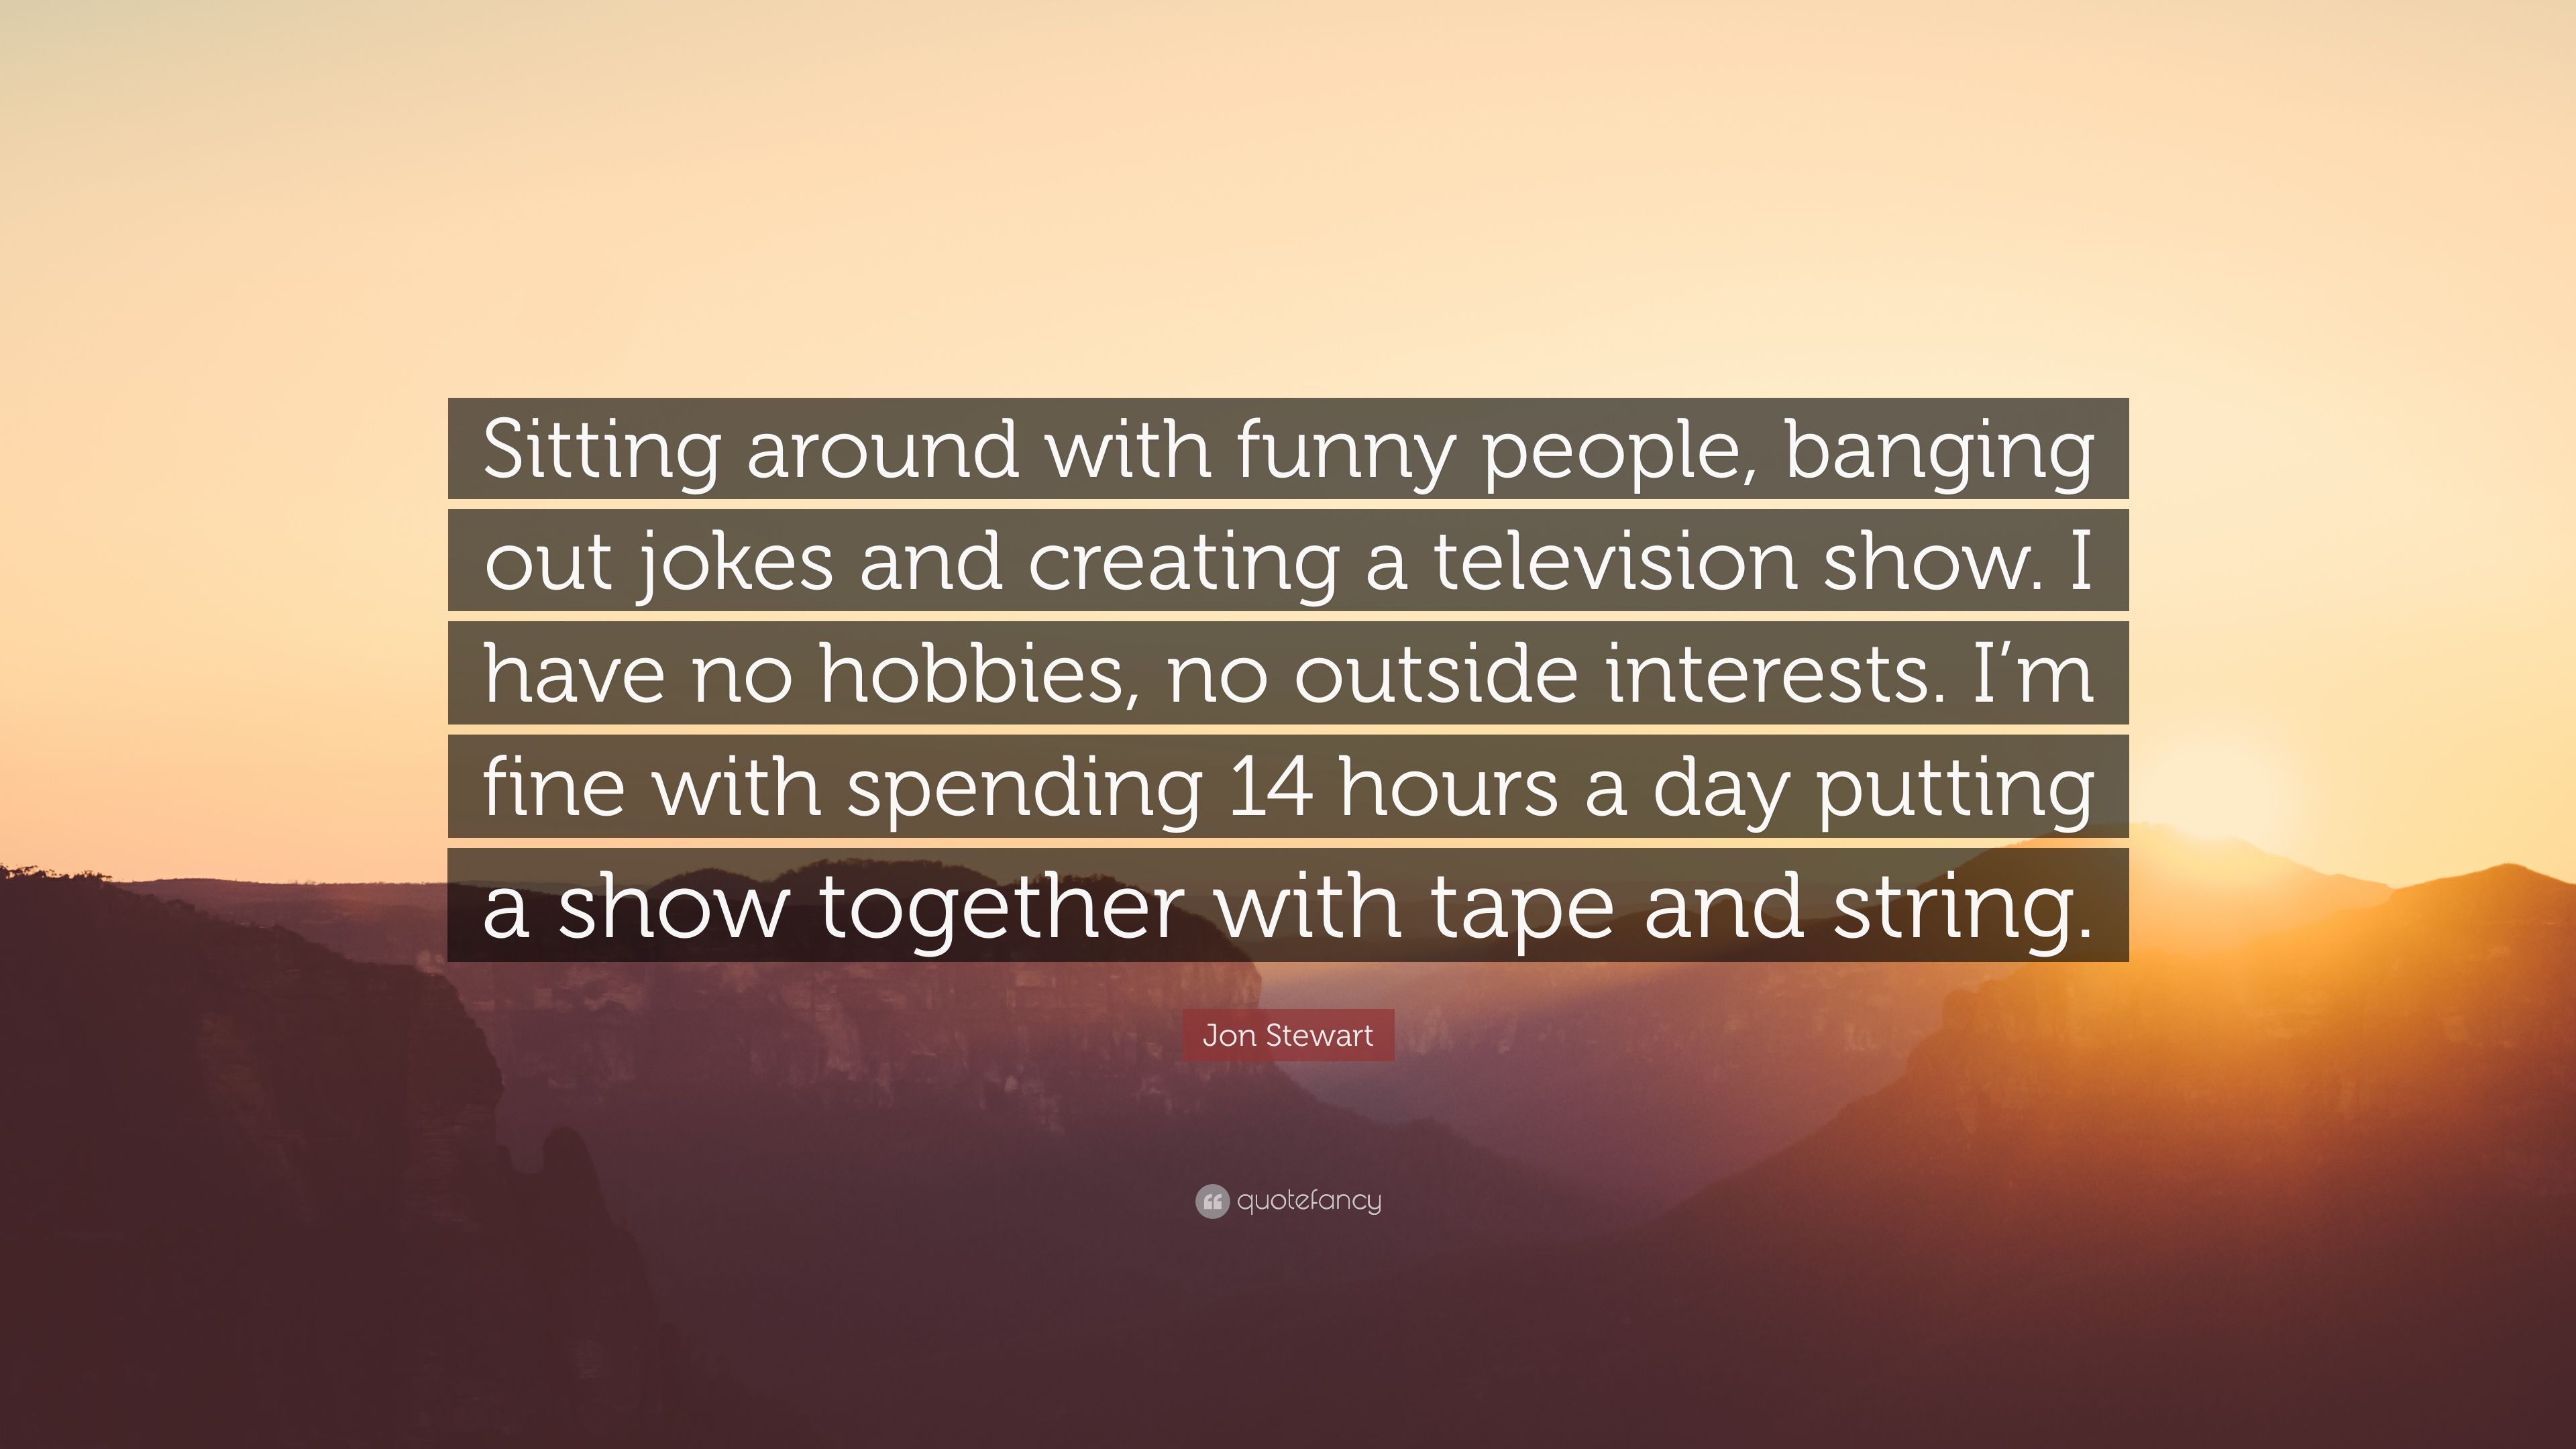 Jon Stewart Quote: “Sitting around with funny people, banging out jokes and creating a television show. I have no hobbies, no outside intere.” (7 wallpaper)